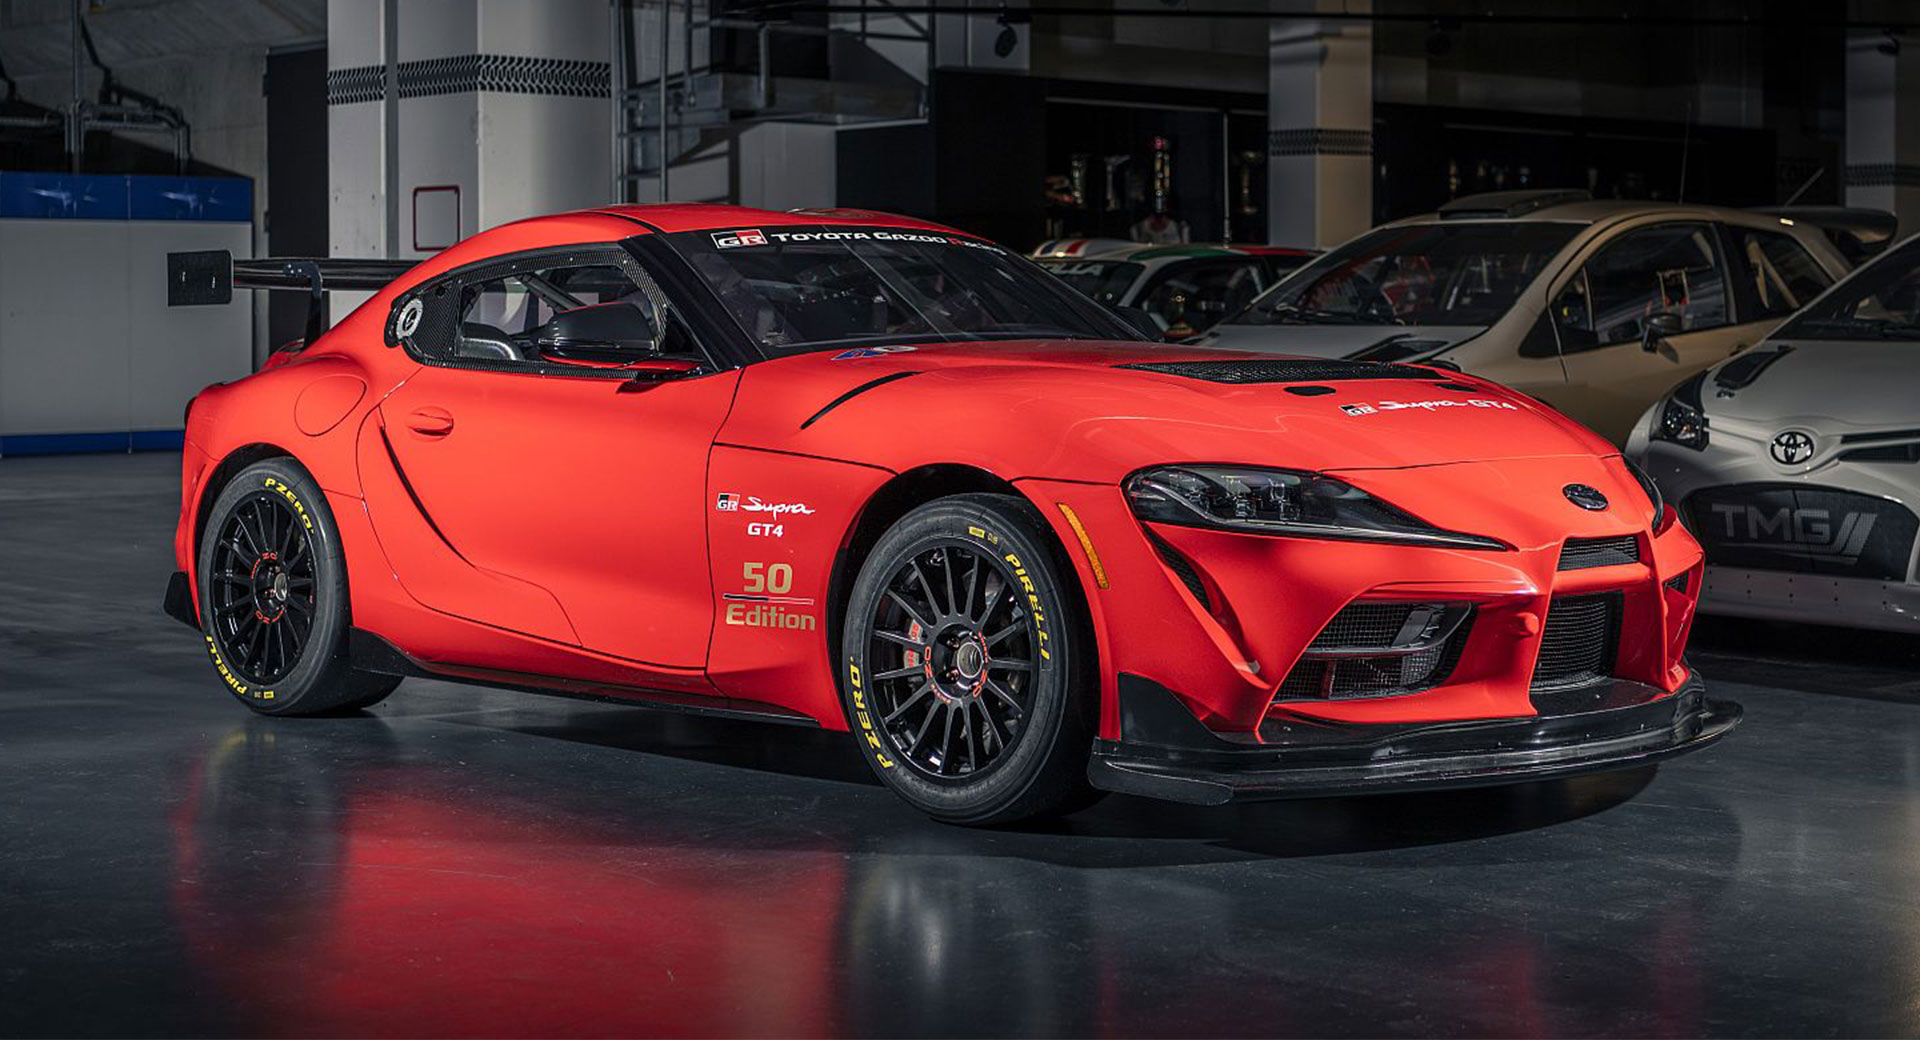 Toyota GR Supra GT4 ’50 Edition’ Race Car Is Limited To Just Six